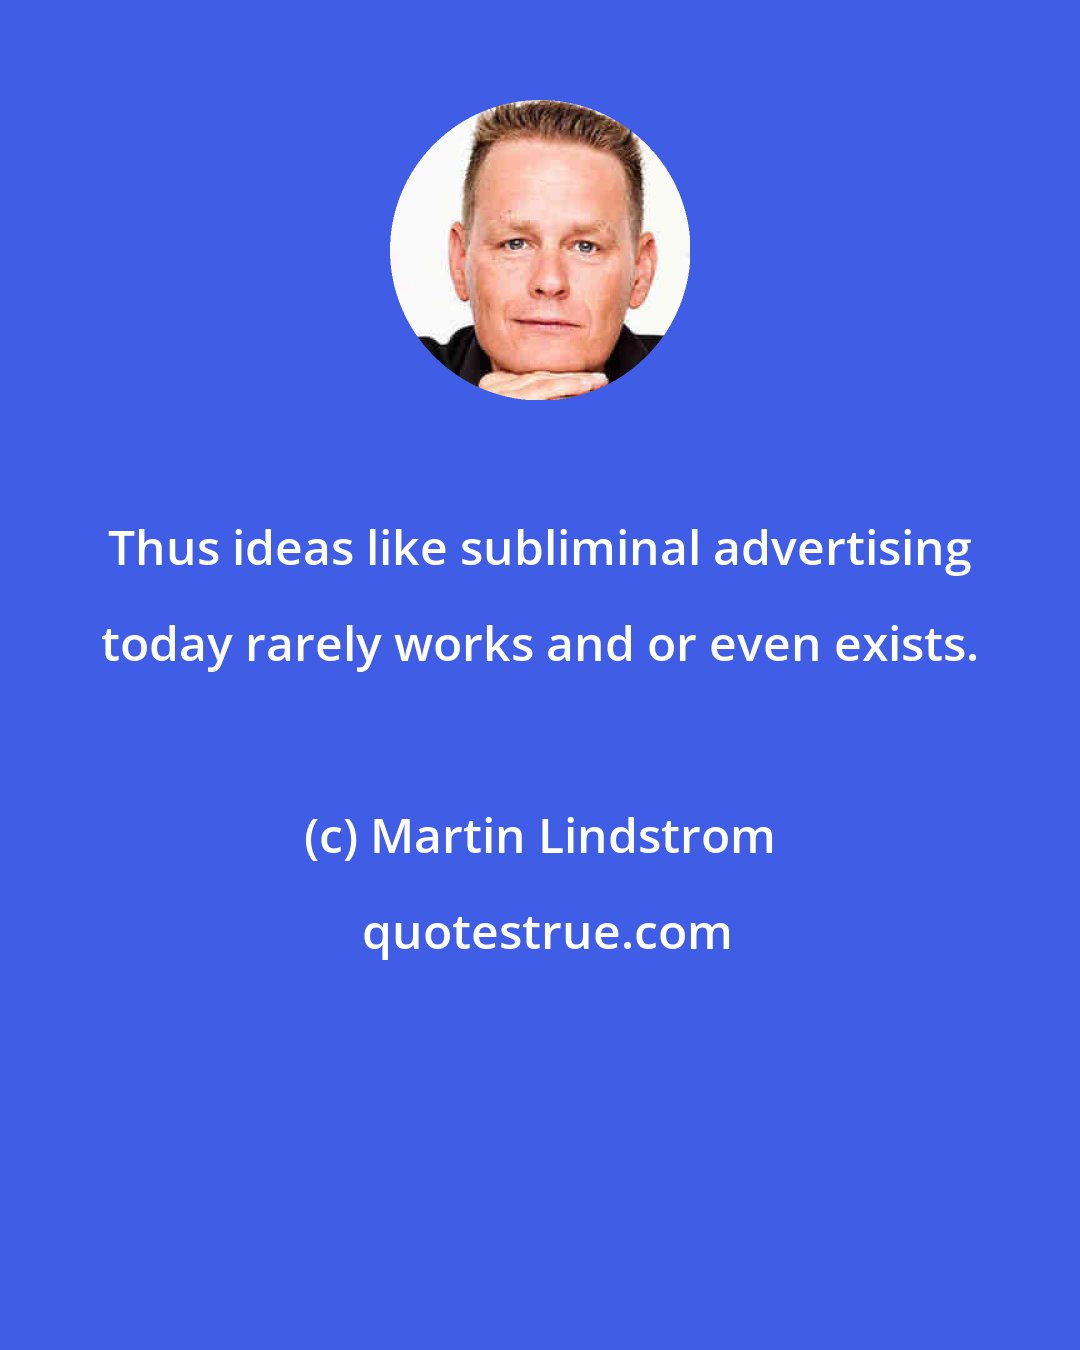 Martin Lindstrom: Thus ideas like subliminal advertising today rarely works and or even exists.